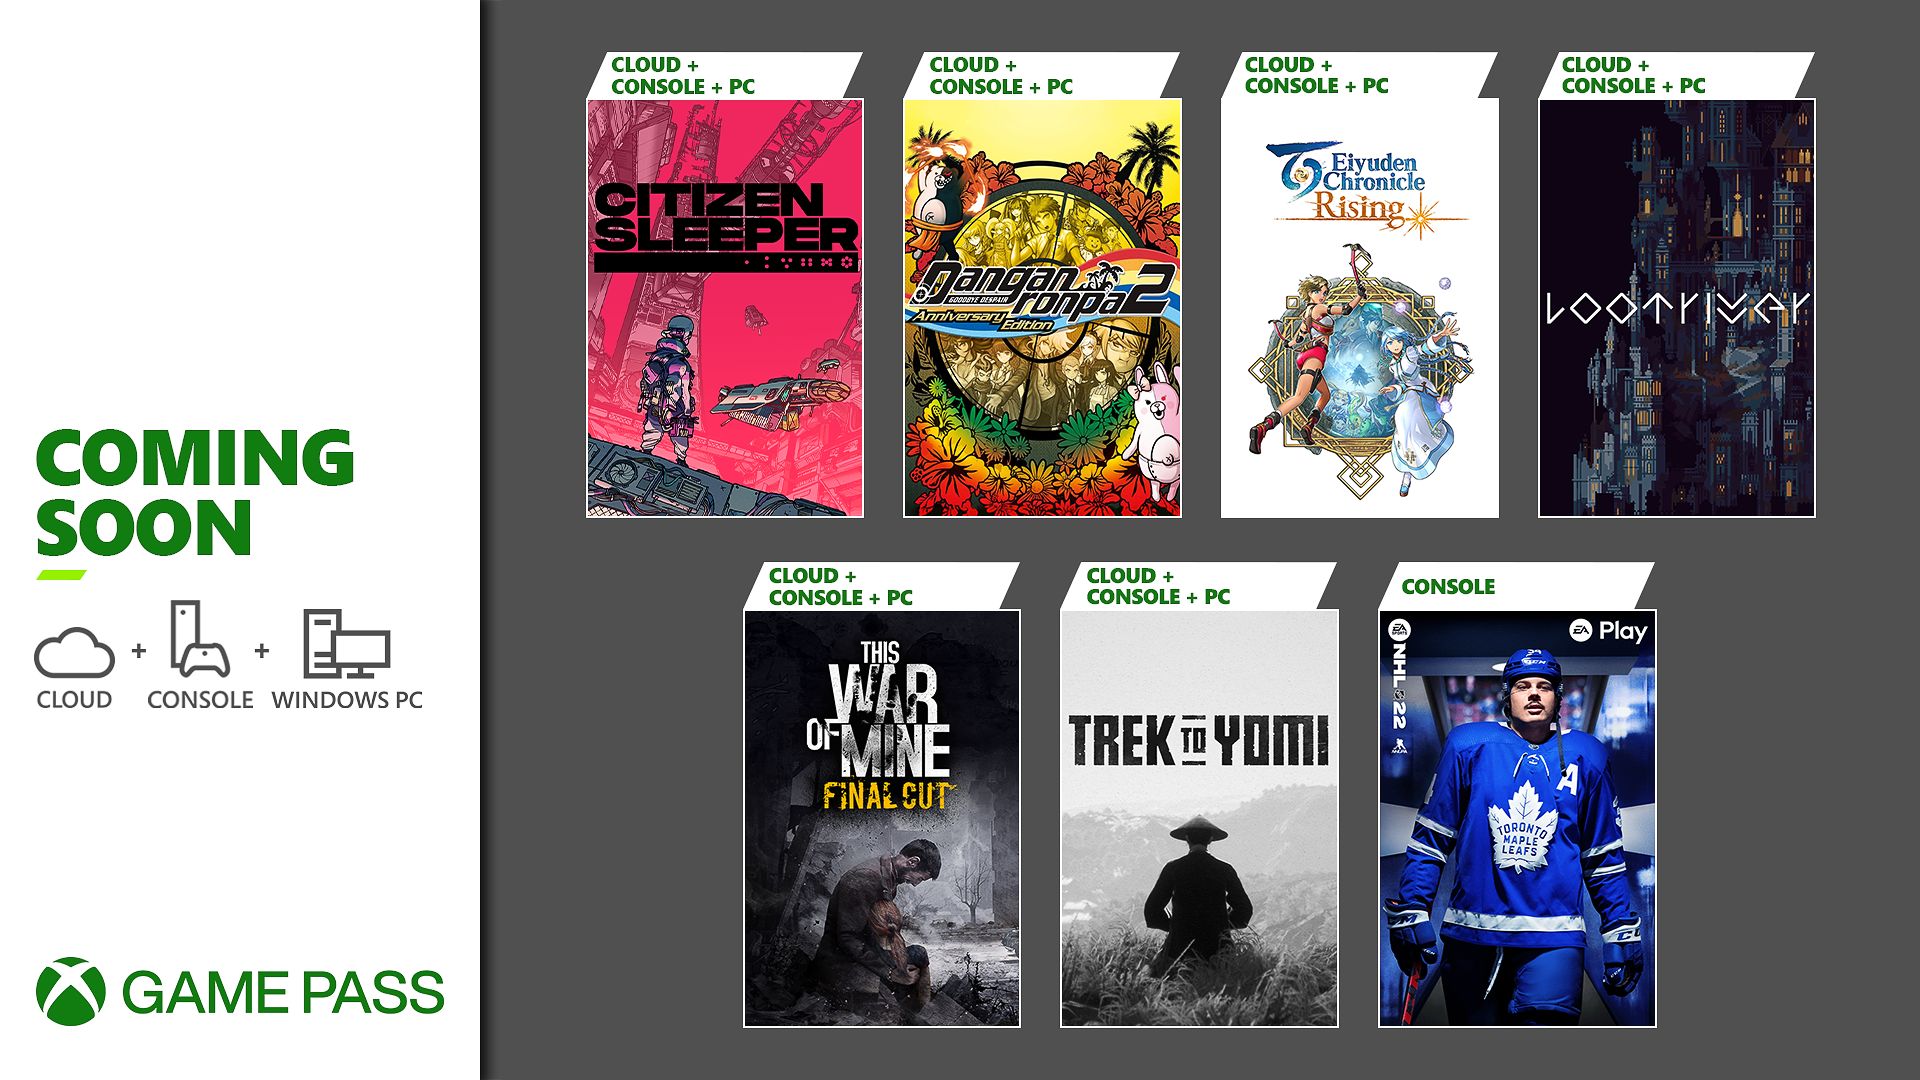 Coming Soon to Xbox Game Pass: Trek to Yomi, Eiyuden Chronicle: Rising, NHL  22, and More - Xbox Wire